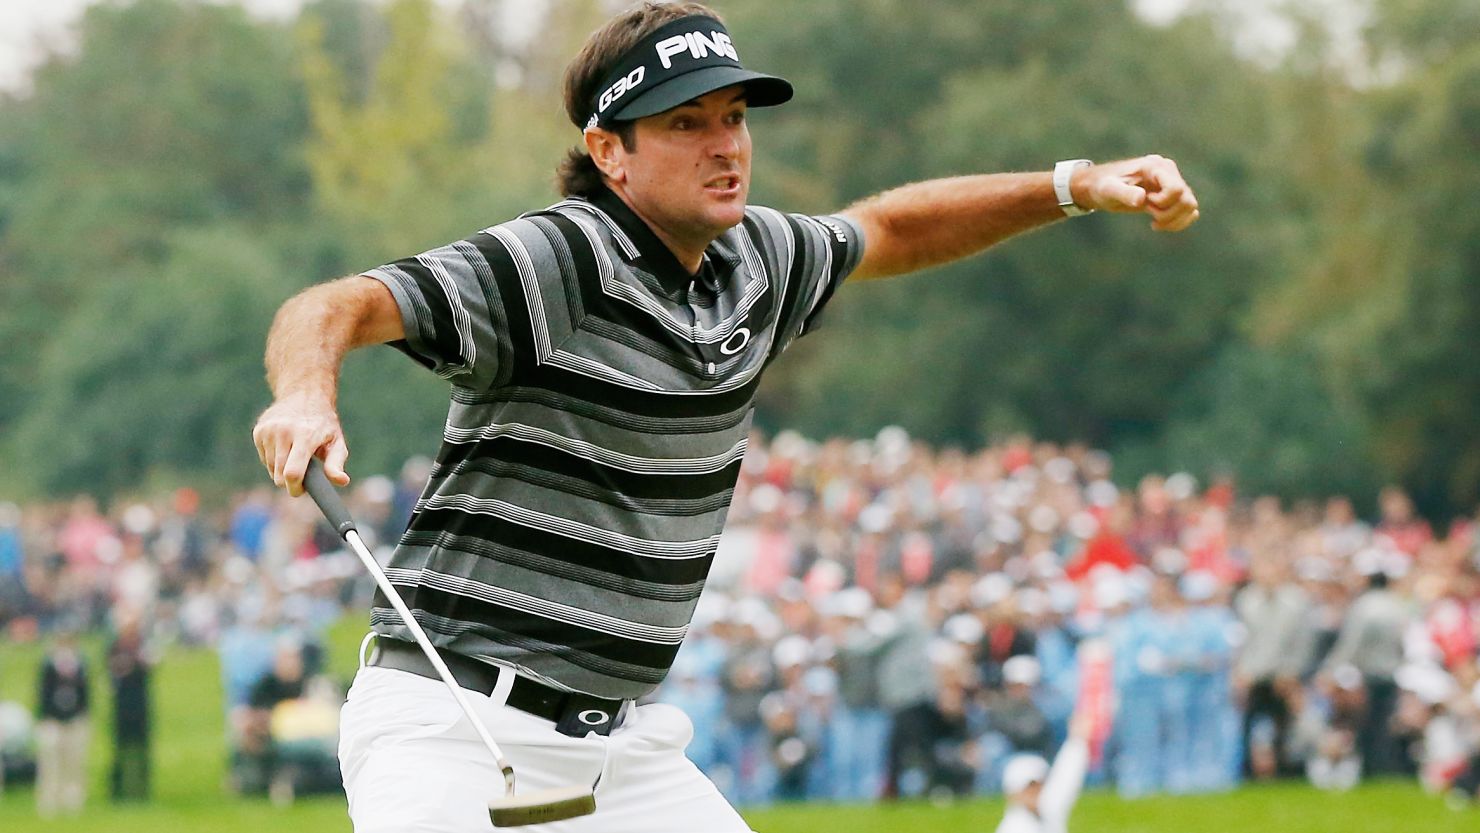 Bubba Watson produced two moments of magic on the 18th green to win the WGC-HSBC tournament in Shanghai.